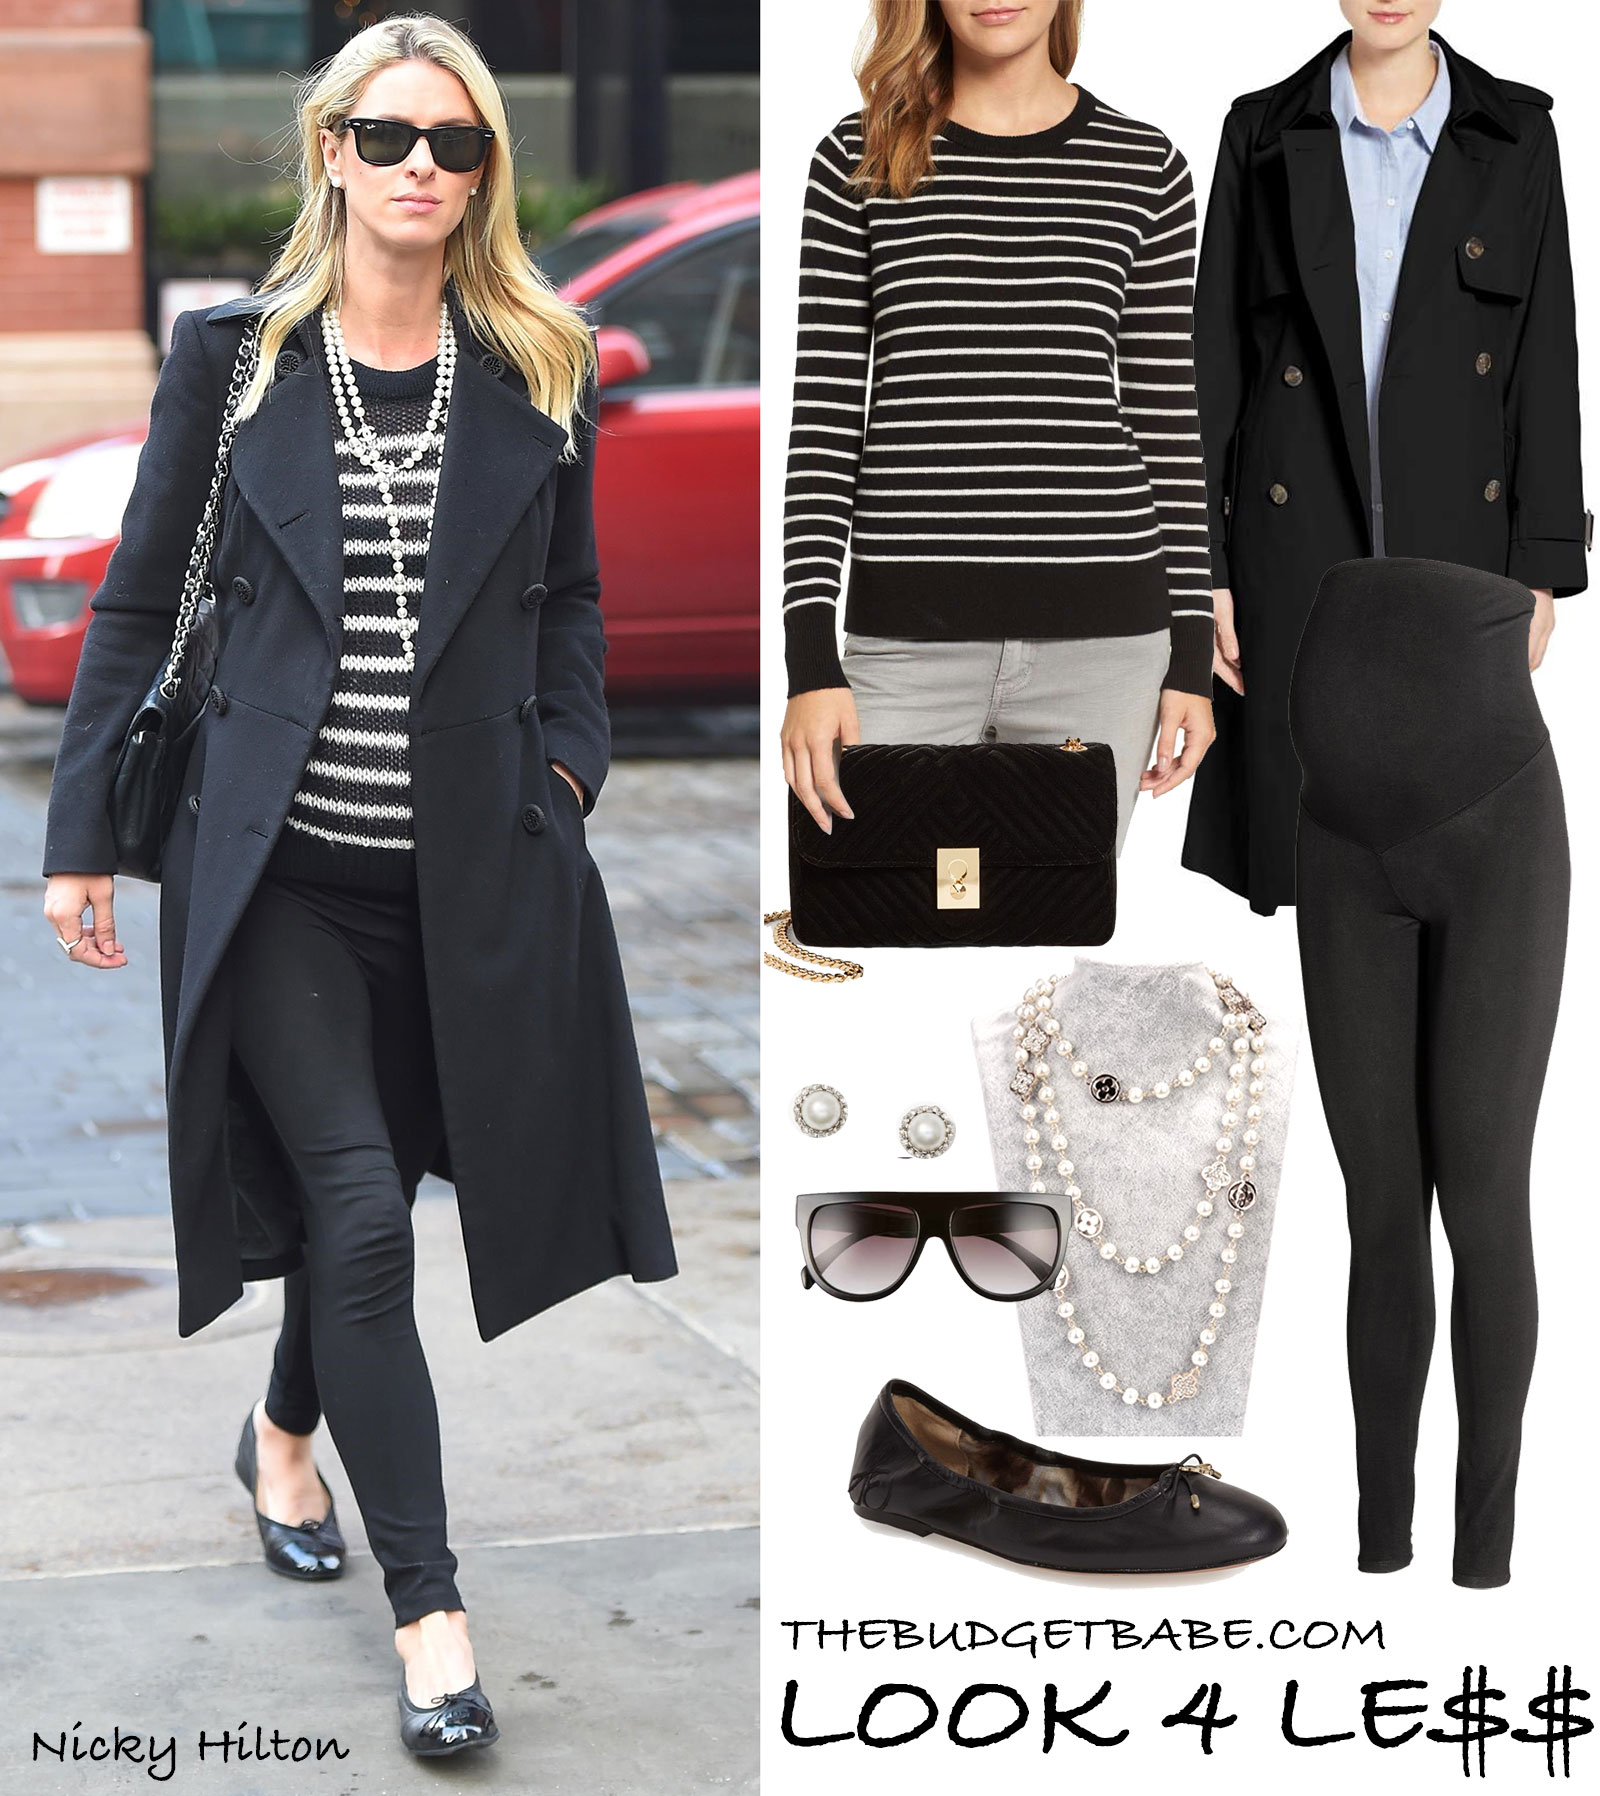 Nicky Hilton's striped sweater and Chanel pearl necklace